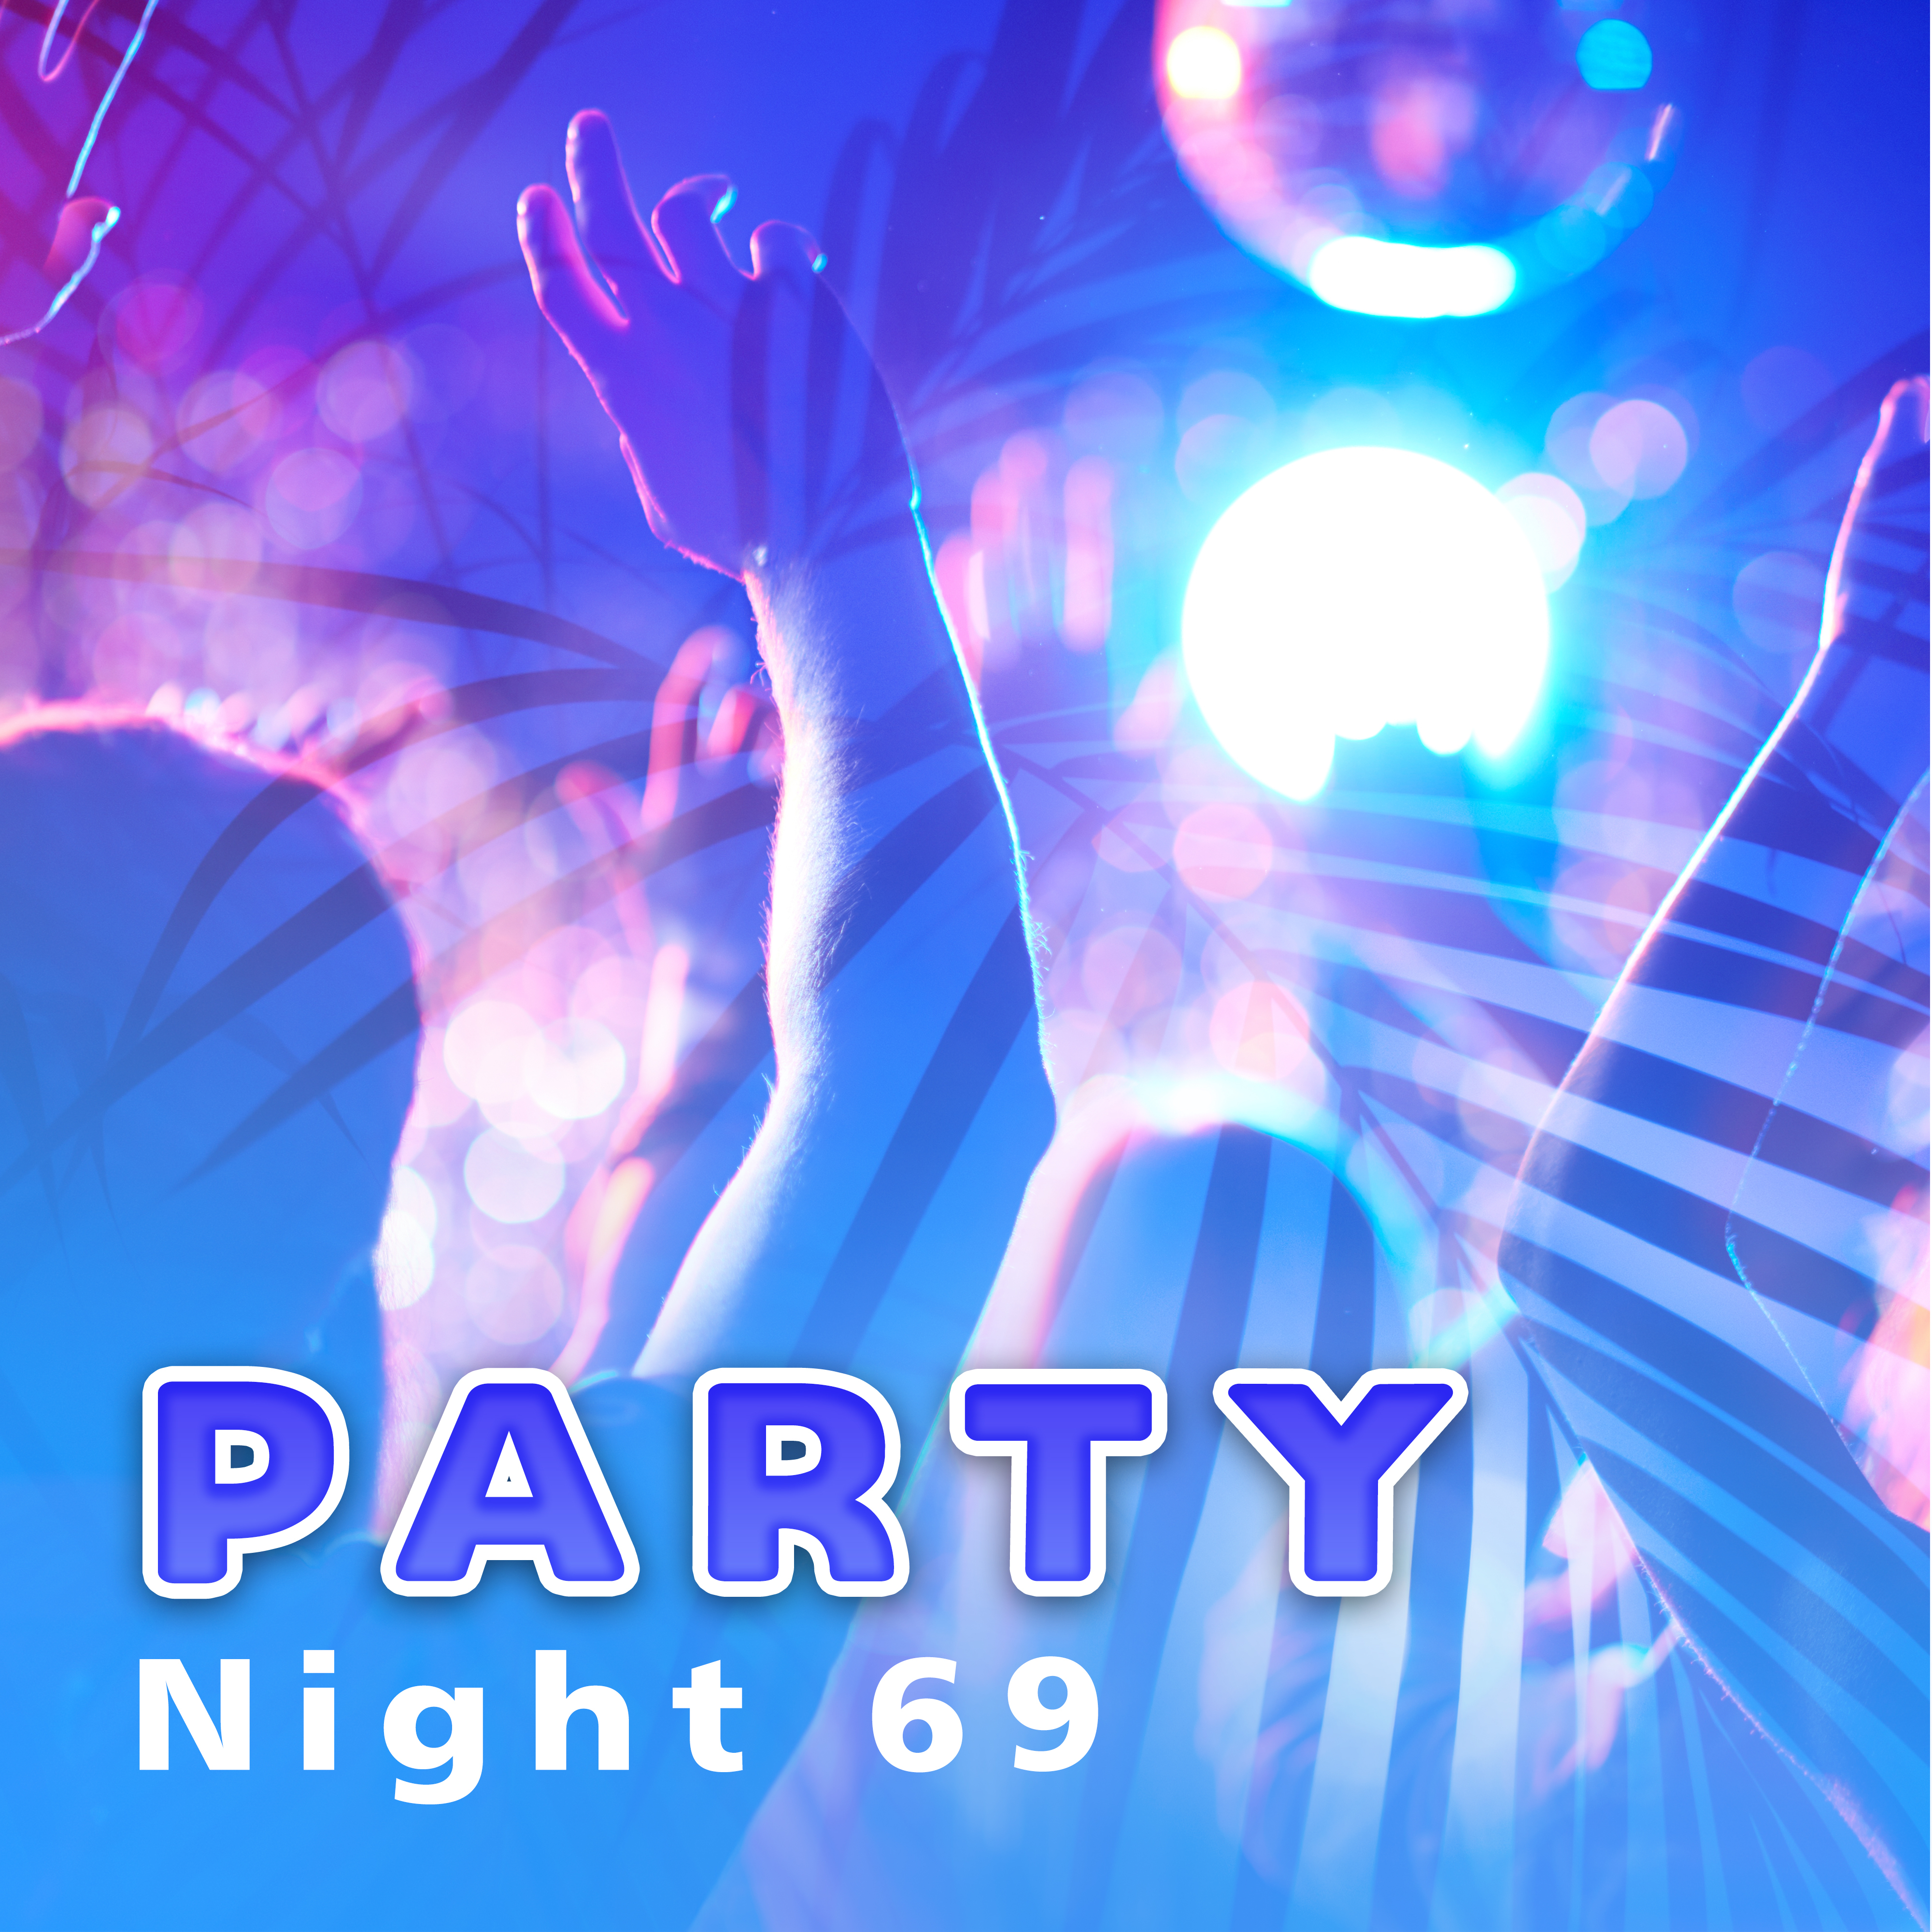 Party Night 69 – Ibiza Dance Party, **** Vibes, Dancefloor, Ambient Summer, Chillout Hits, Ibiza 2017, *** Music